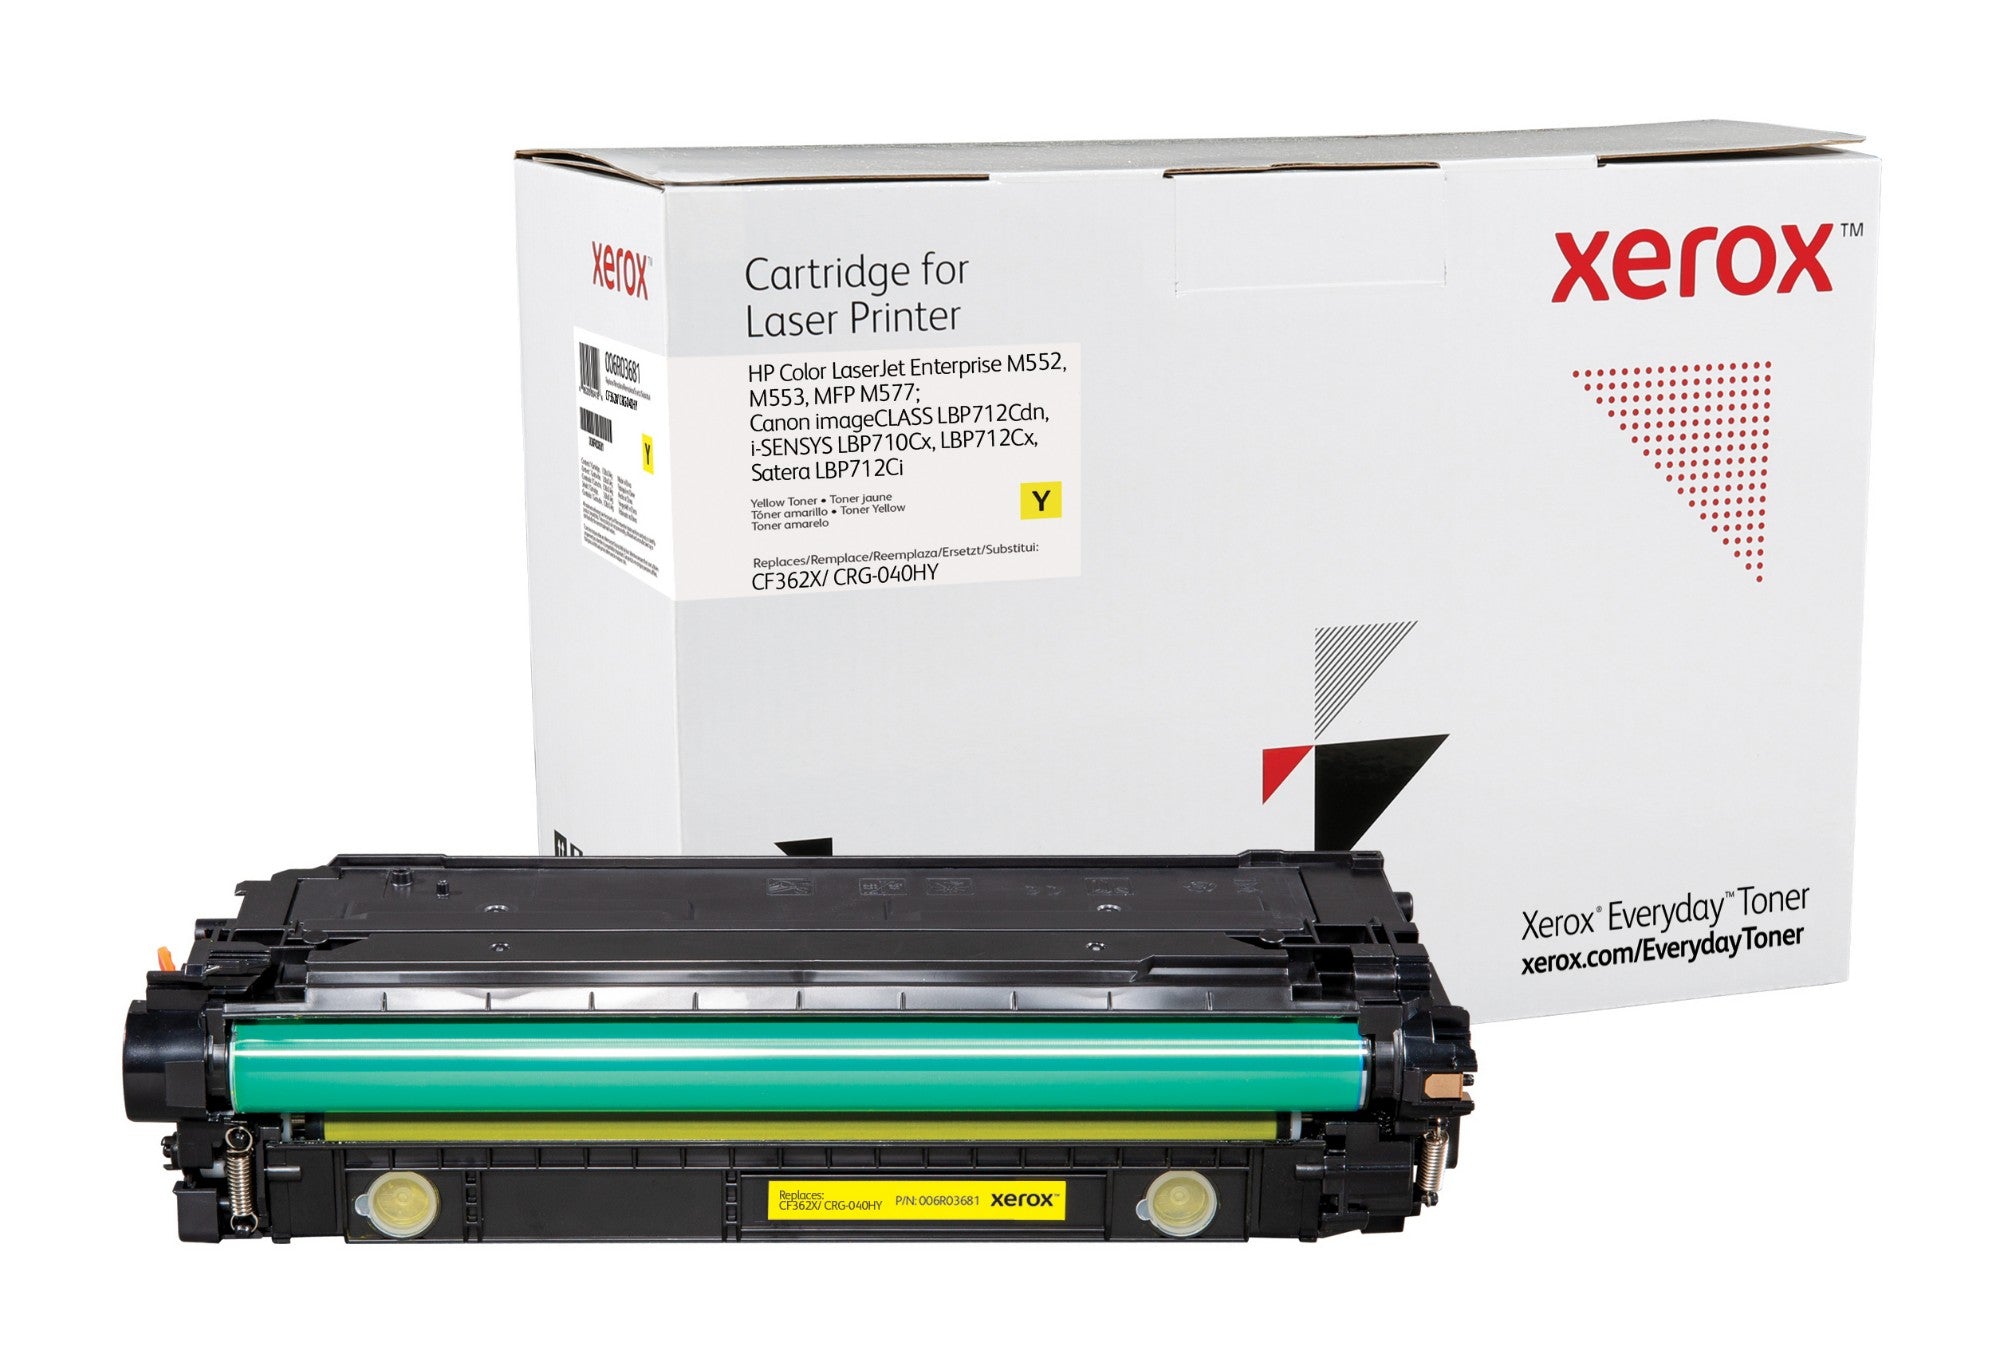 Xerox 006R03681 Toner cartridge yellow, 9.5K pages (replaces Canon 040HY HP 508X/CF362X) for Canon LBP-710/HP CLJ M 552